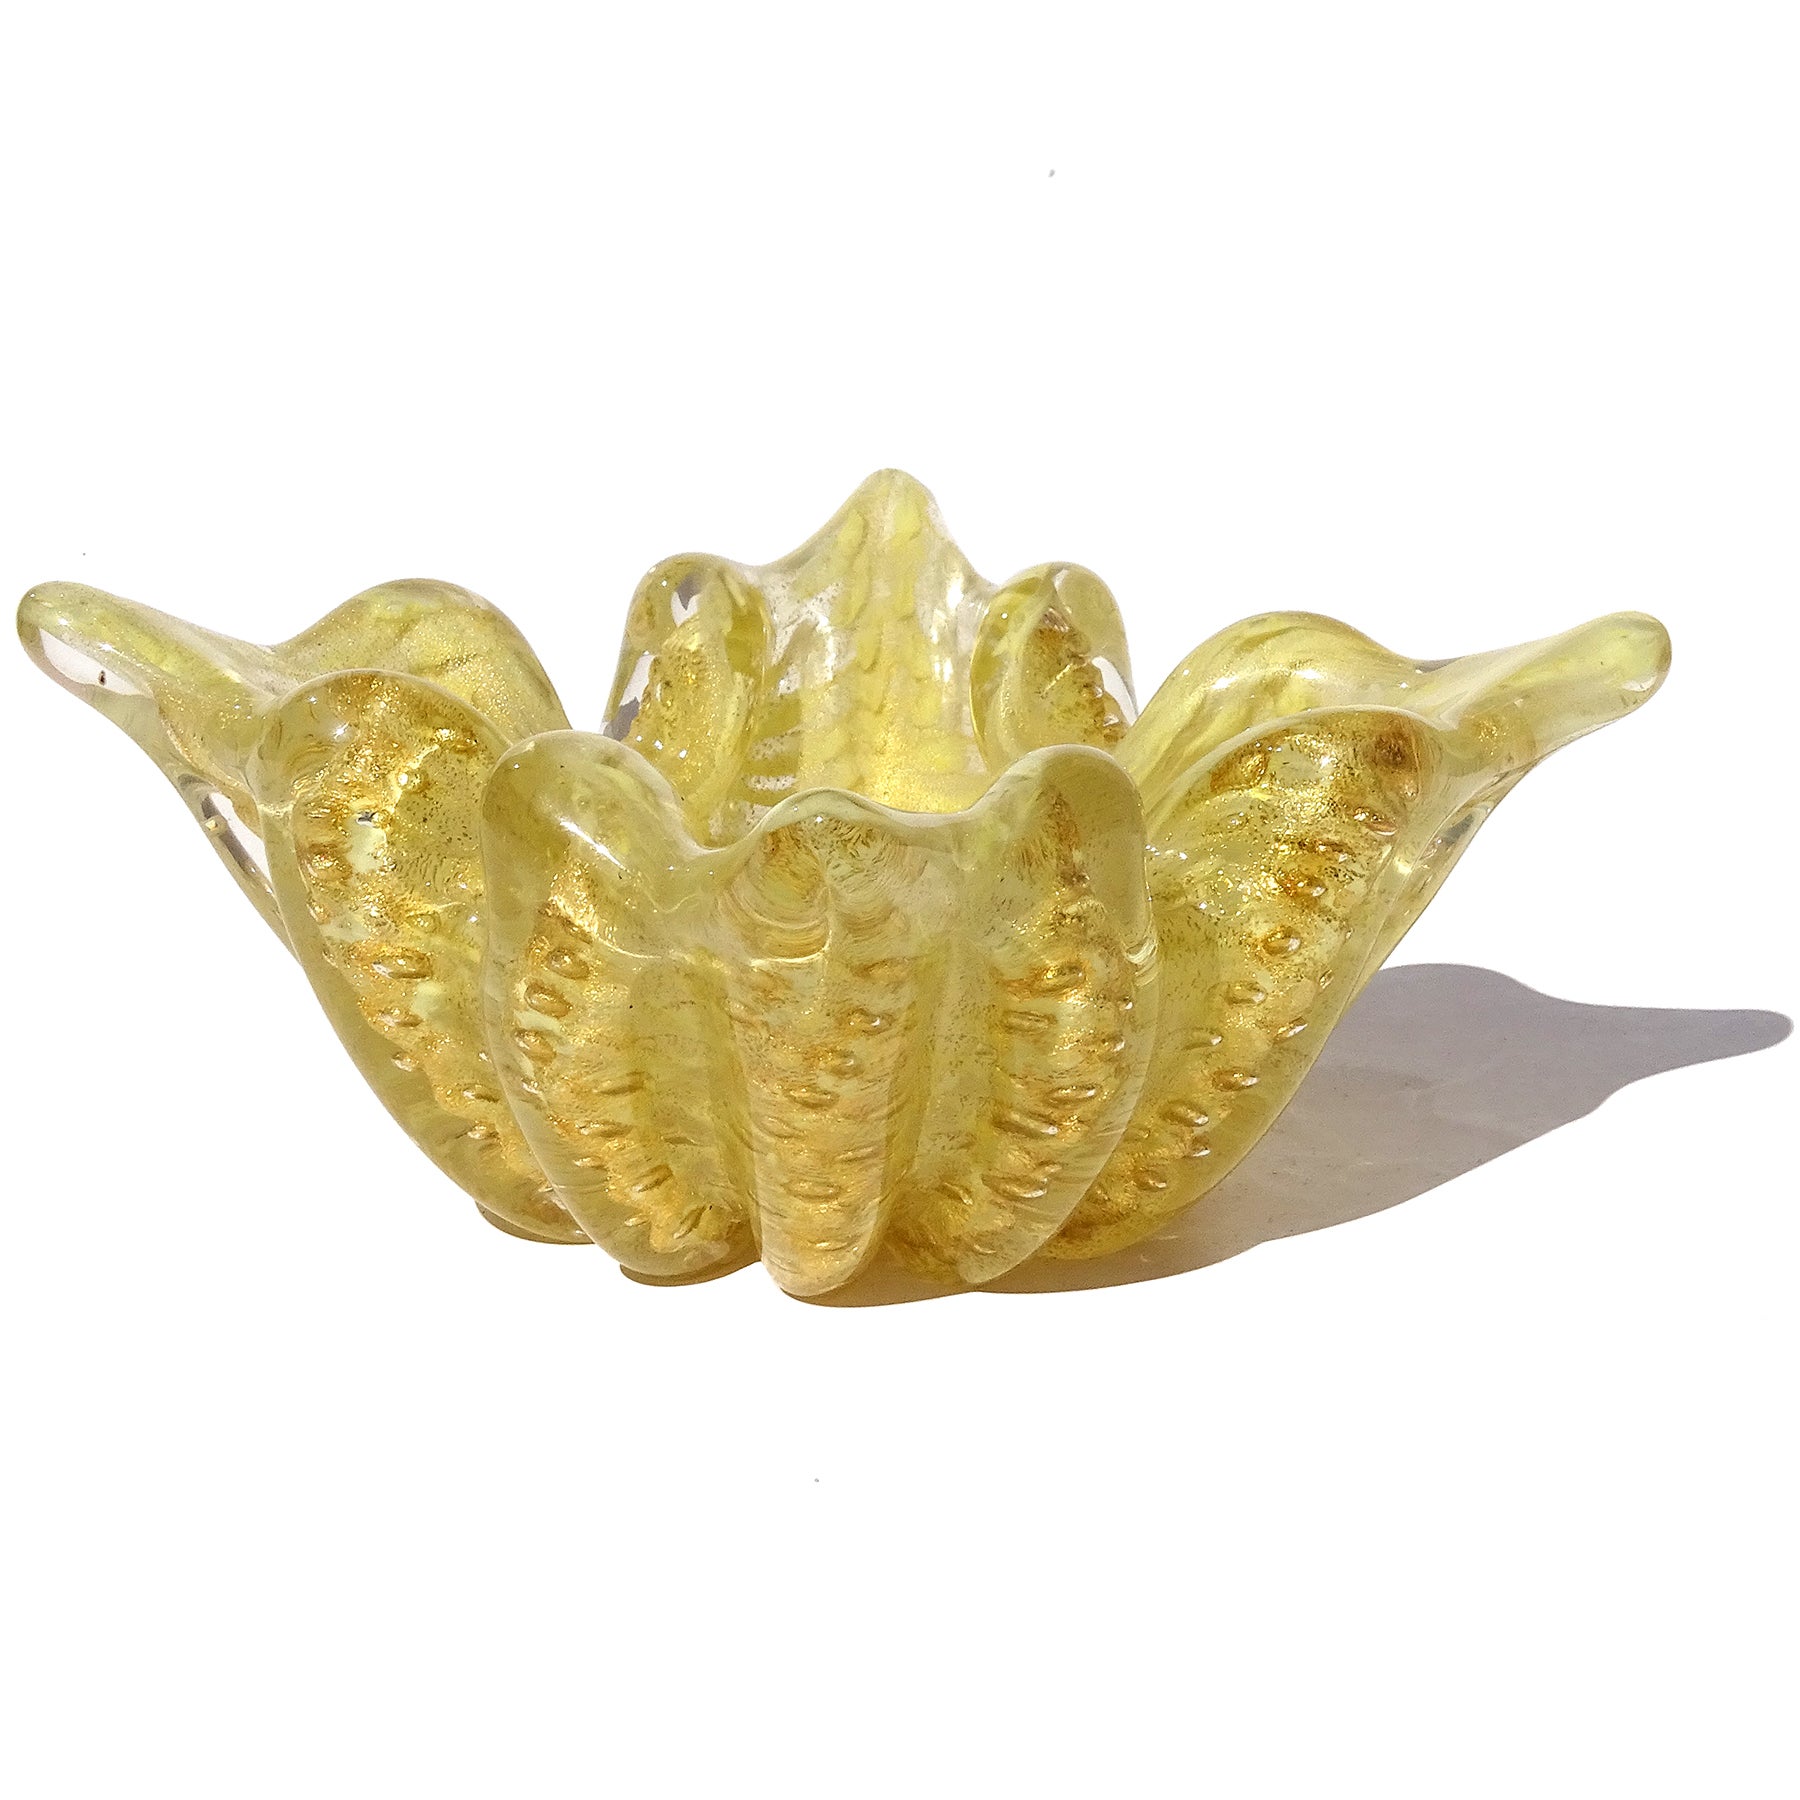 Beautiful vintage Murano hand blown bright yellow and gold flecks Italian art glass ribbed with spike corners bowl / cigar ashtray. Documented to designer Ercole Barovier for the the Barovier e Toso company. The color is a made with pigments added